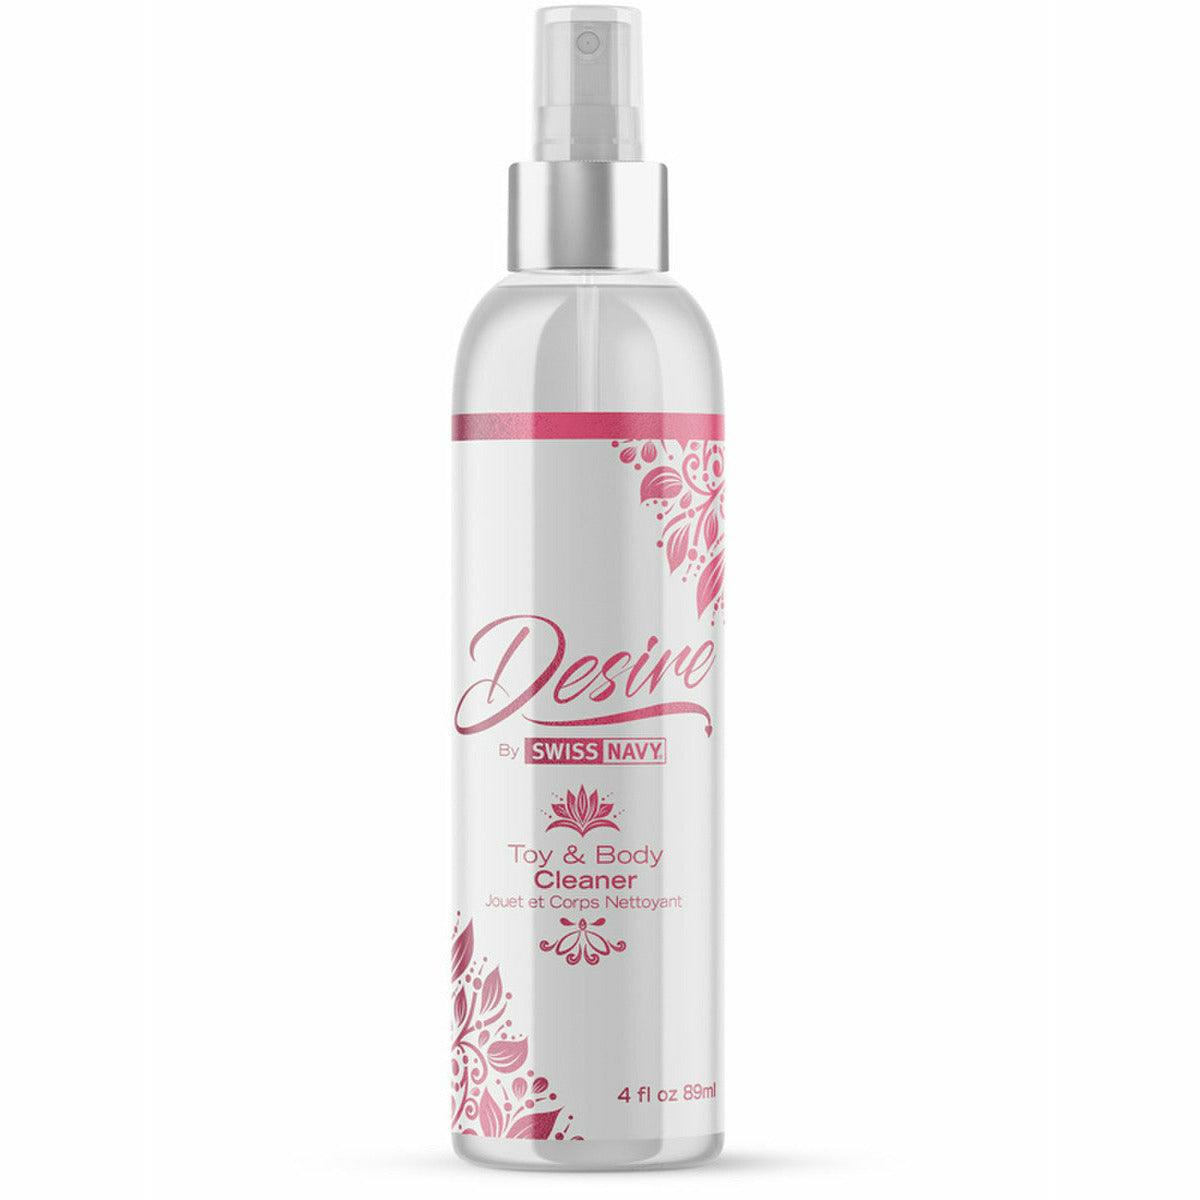 Desire Toy and Body Cleaner 4oz 118ml